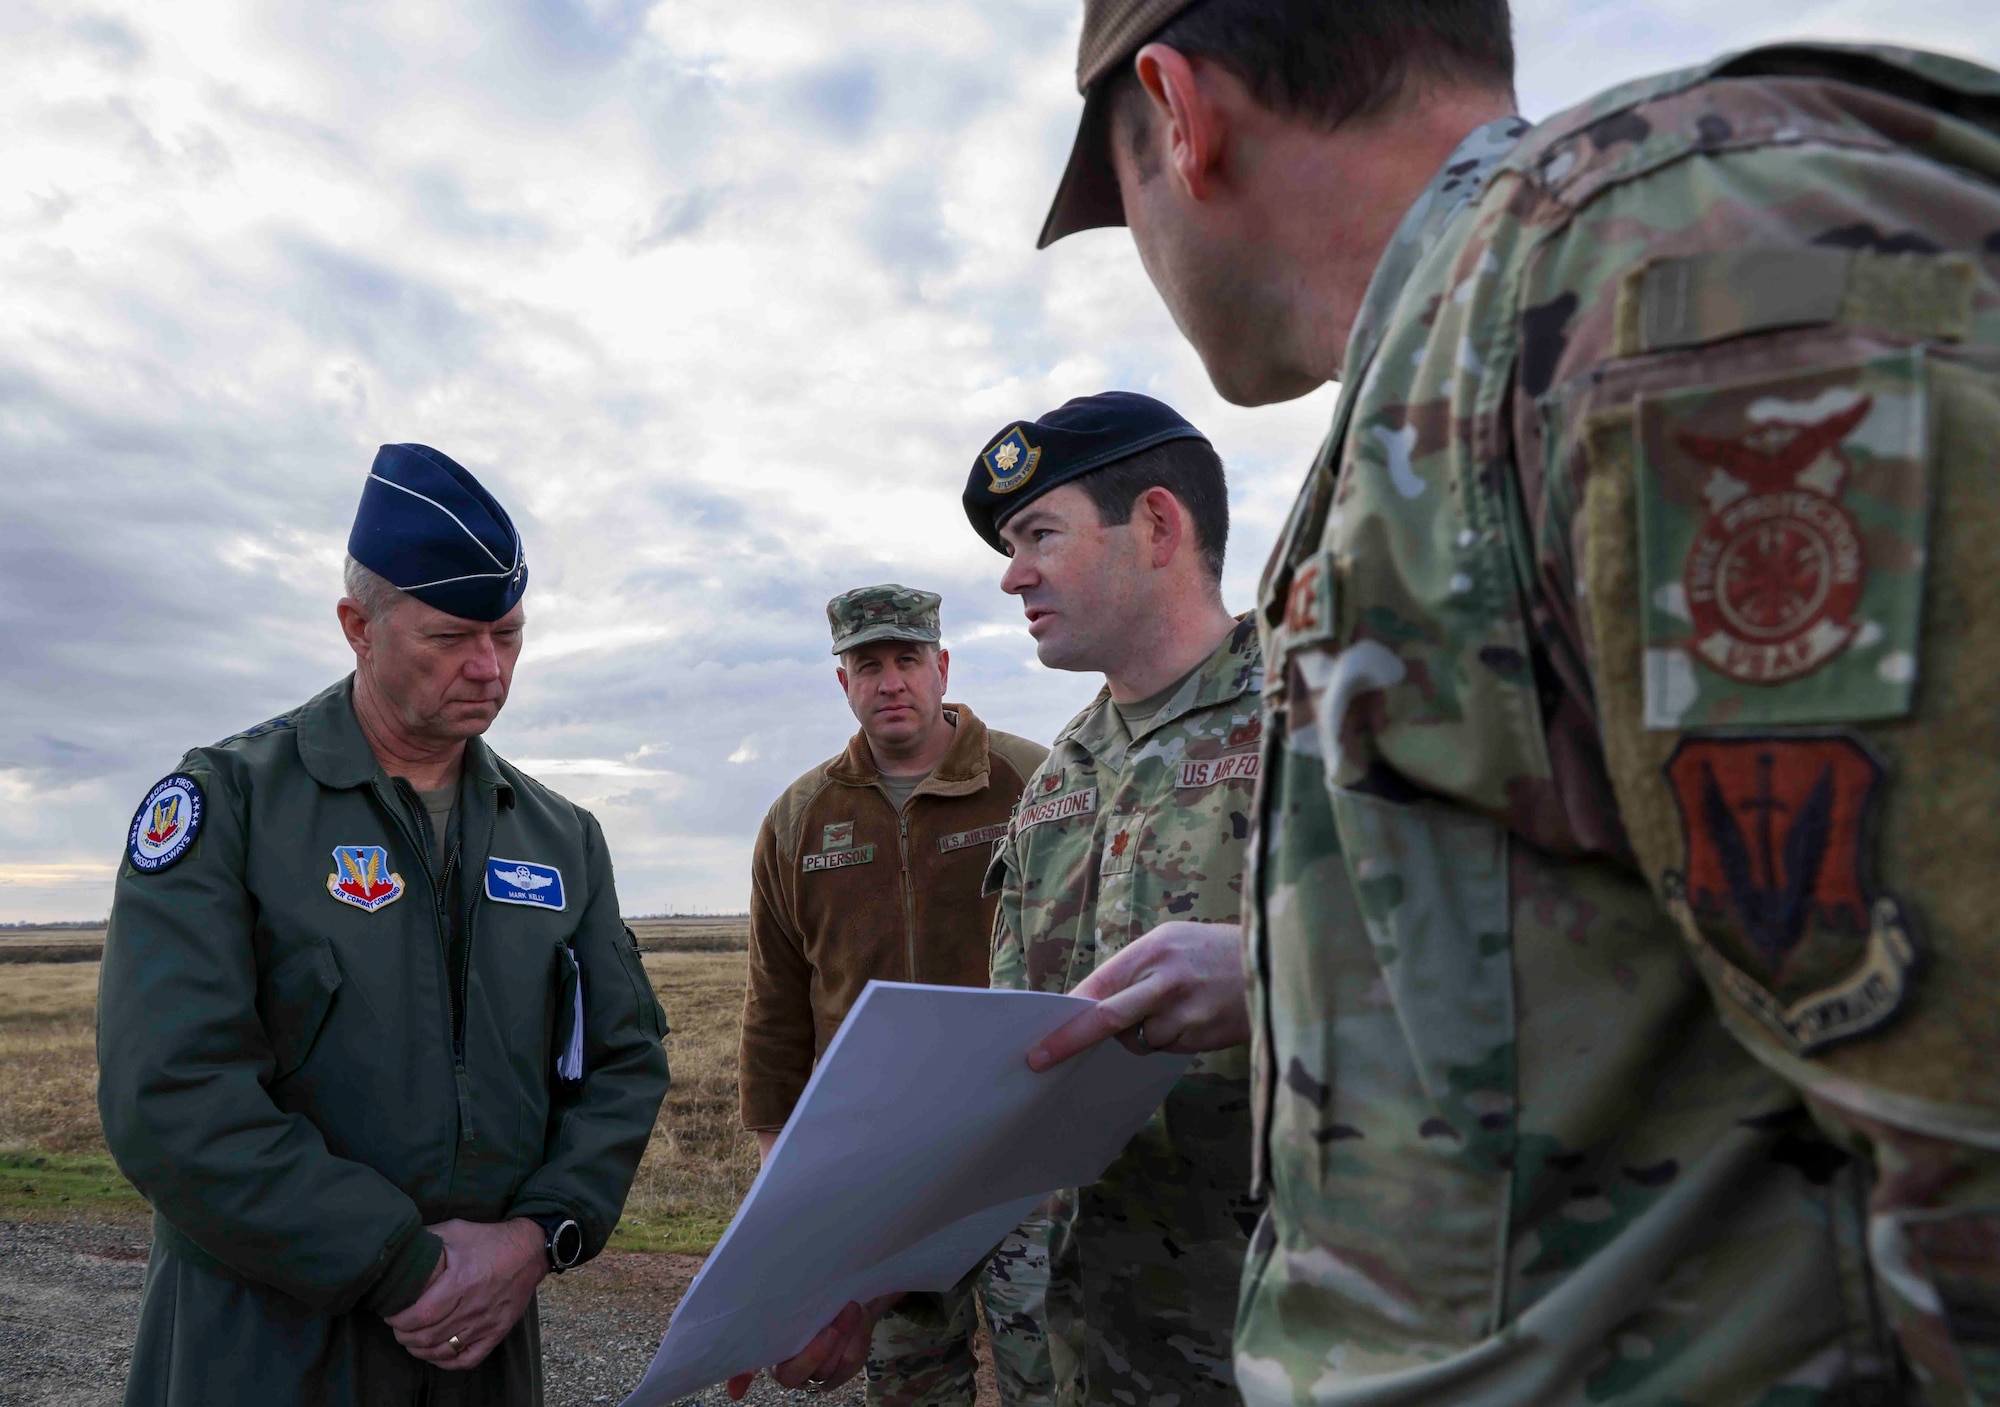 U.S. Air Force Gen. Mark Kelly, commander of Air Combat Command, inspects the 9th Mission Support Group’s infrastructure plans during a visit at Beale Air Force Base, Calif. on Dec. 6, 2022.